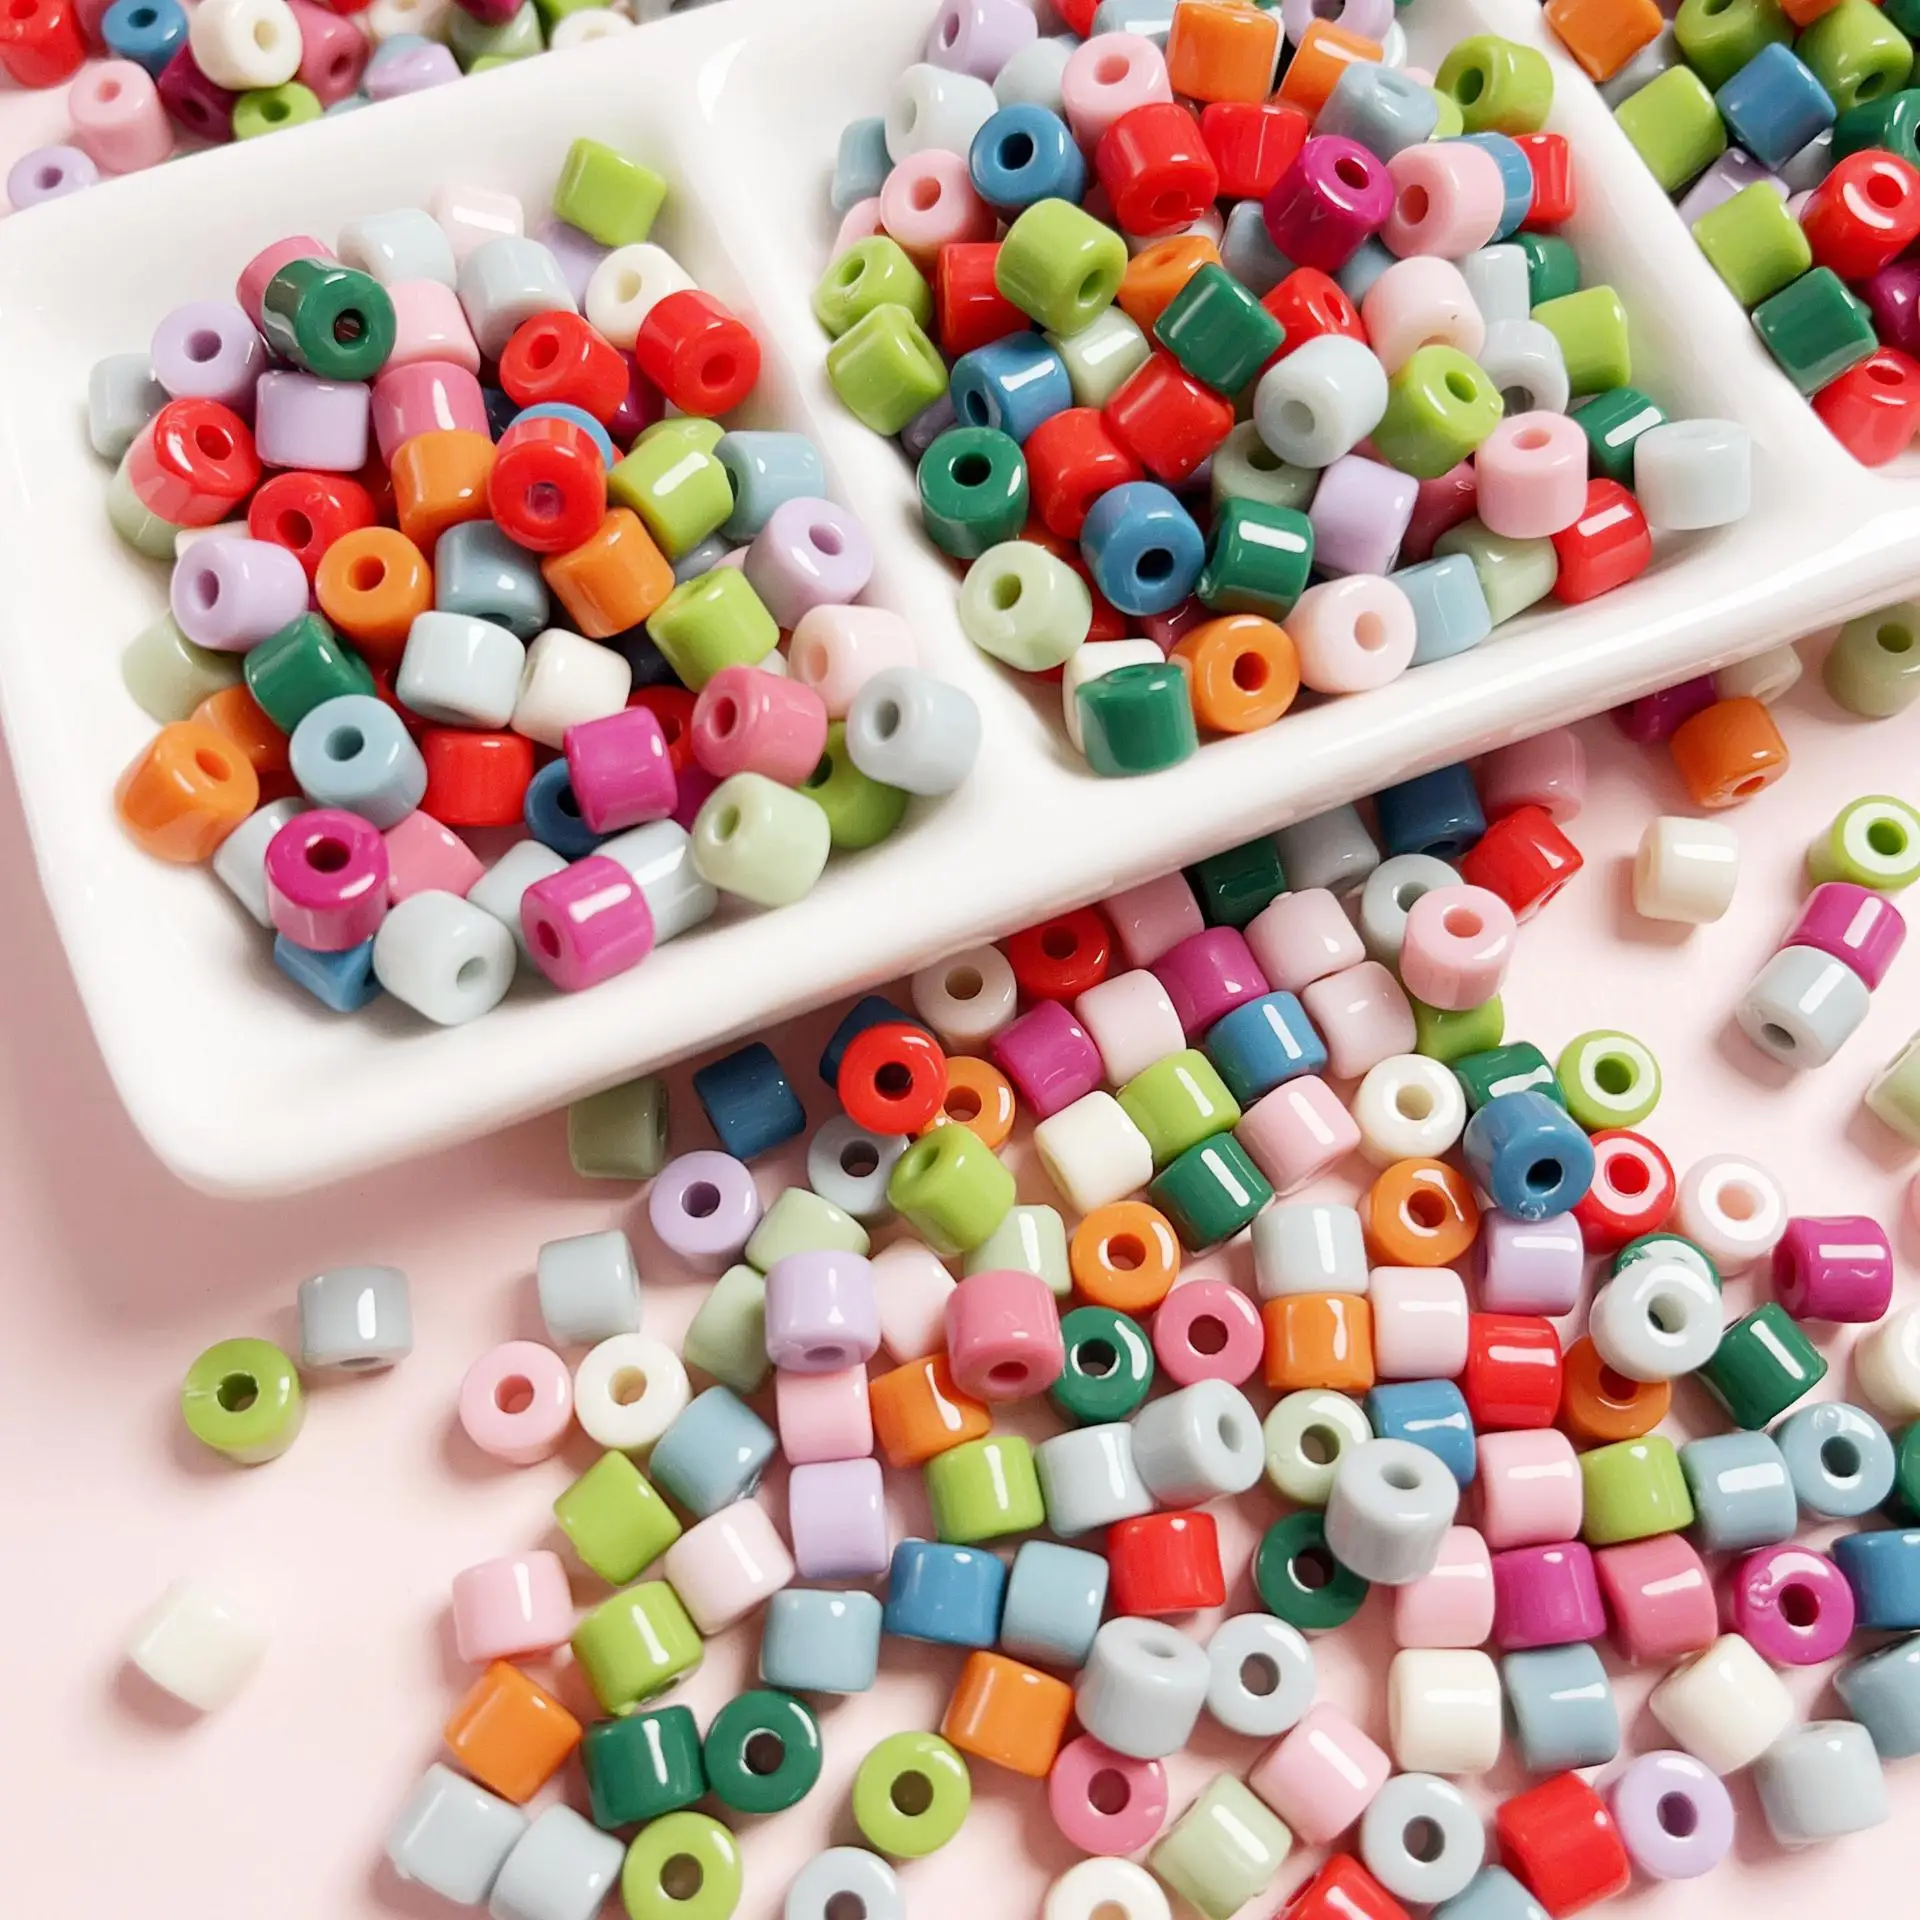 

DIY Jewelry Findings Acrylic Solid Colors Pony Beads 500pcs 5*6mm Plastic Necklace Bracelet Earring Barrel Spacers Ornament